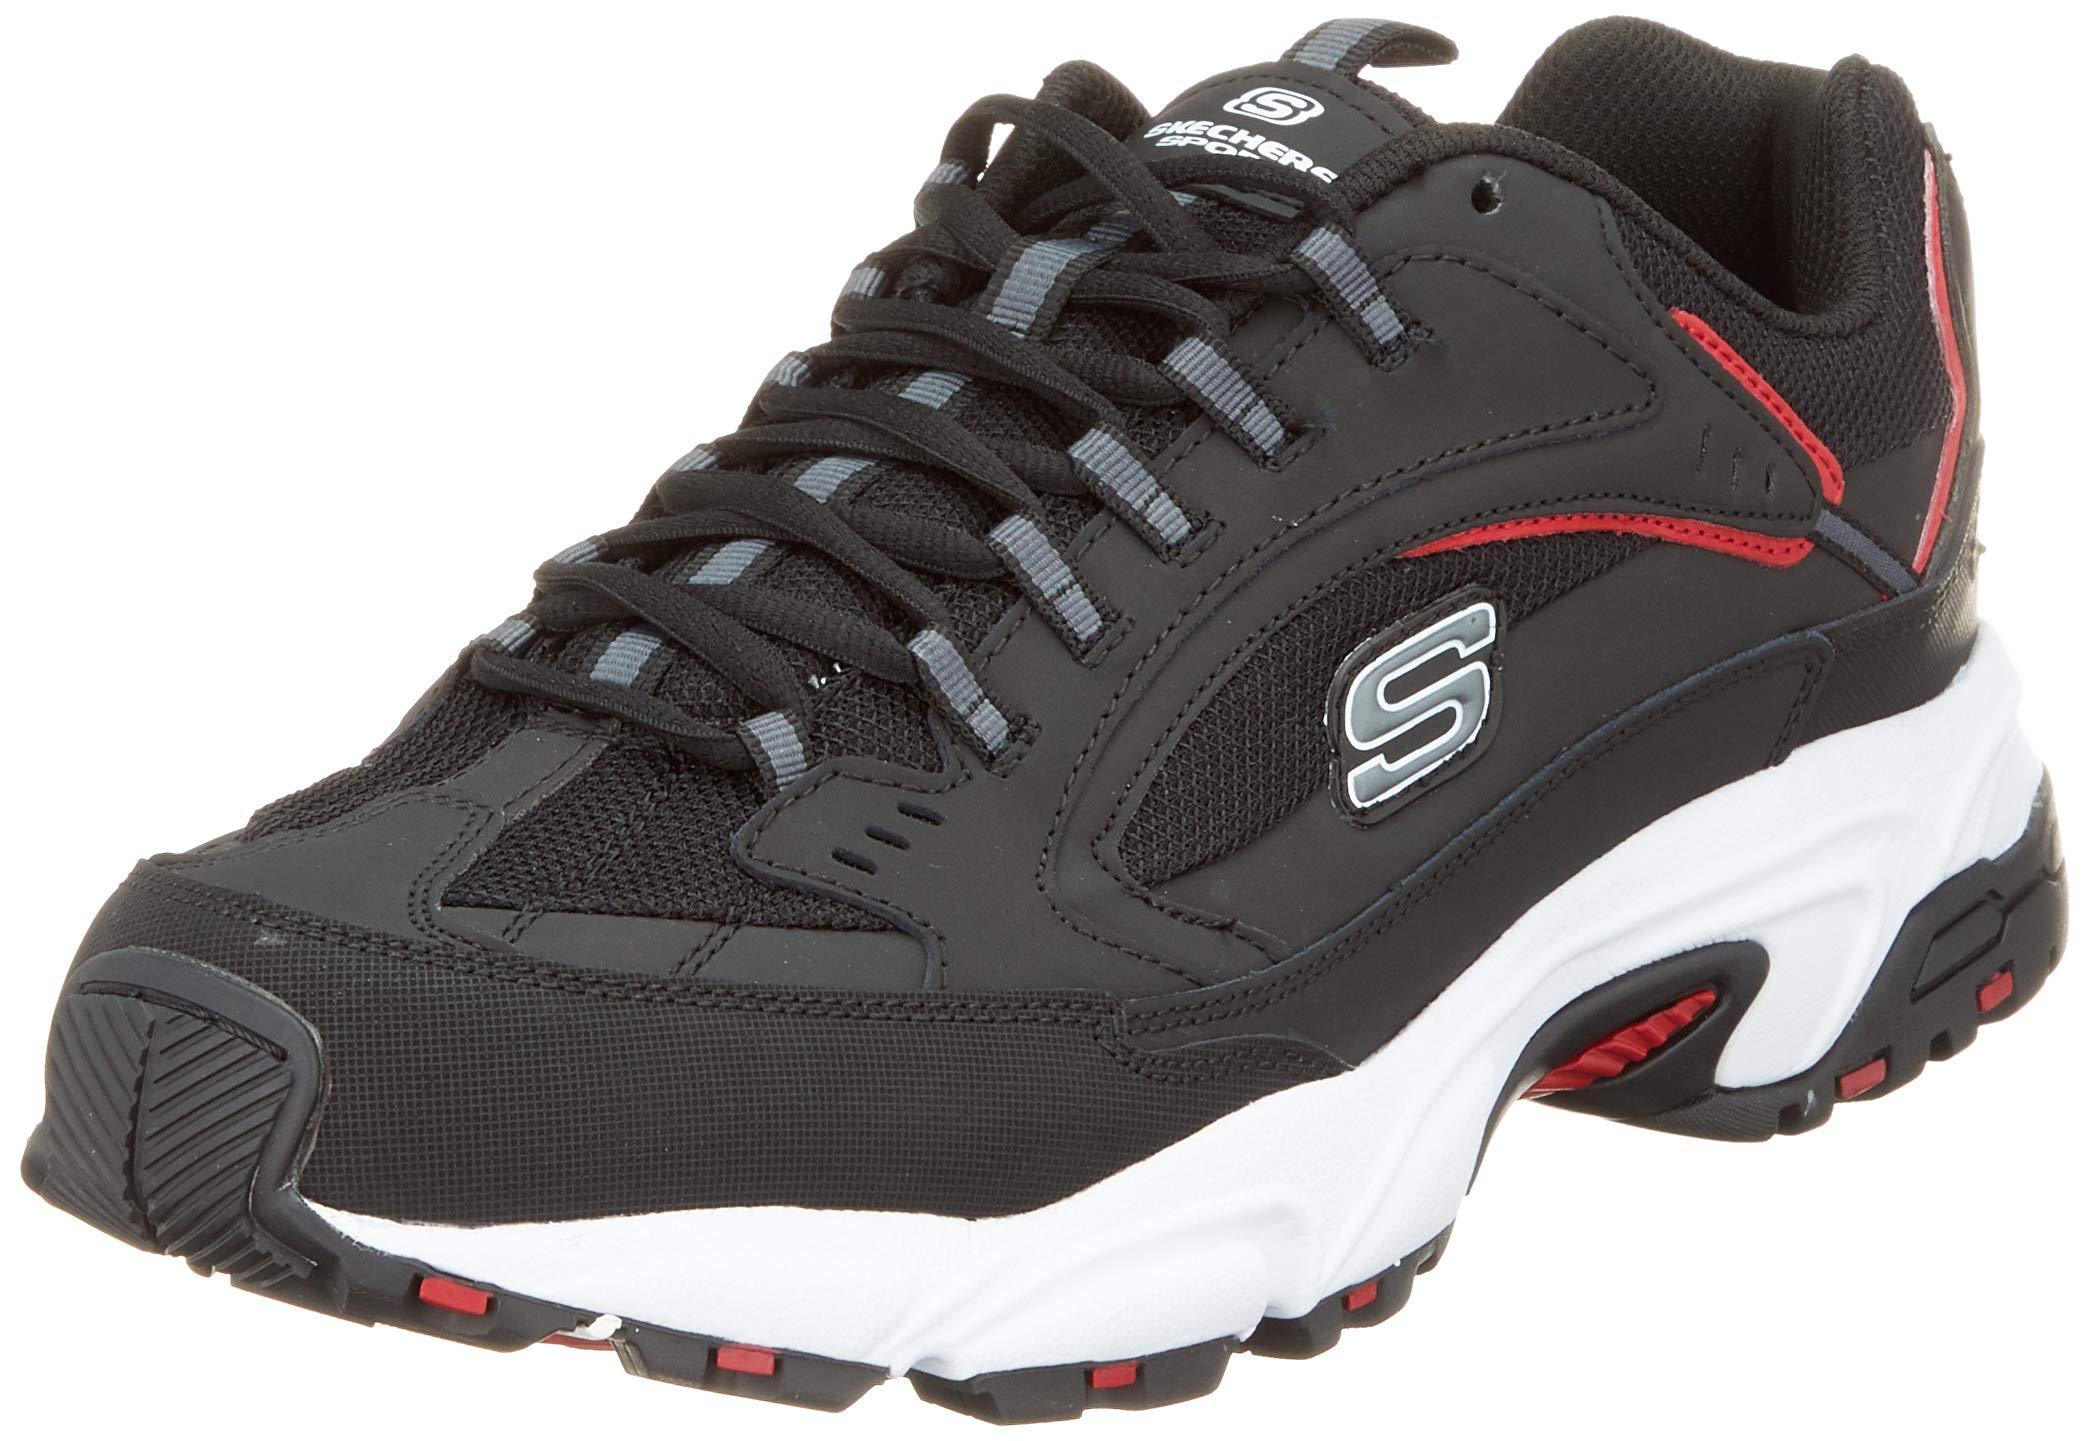 Skechers Stamina Cutback Trainers in Black/Navy (Black) for Men - Save ...